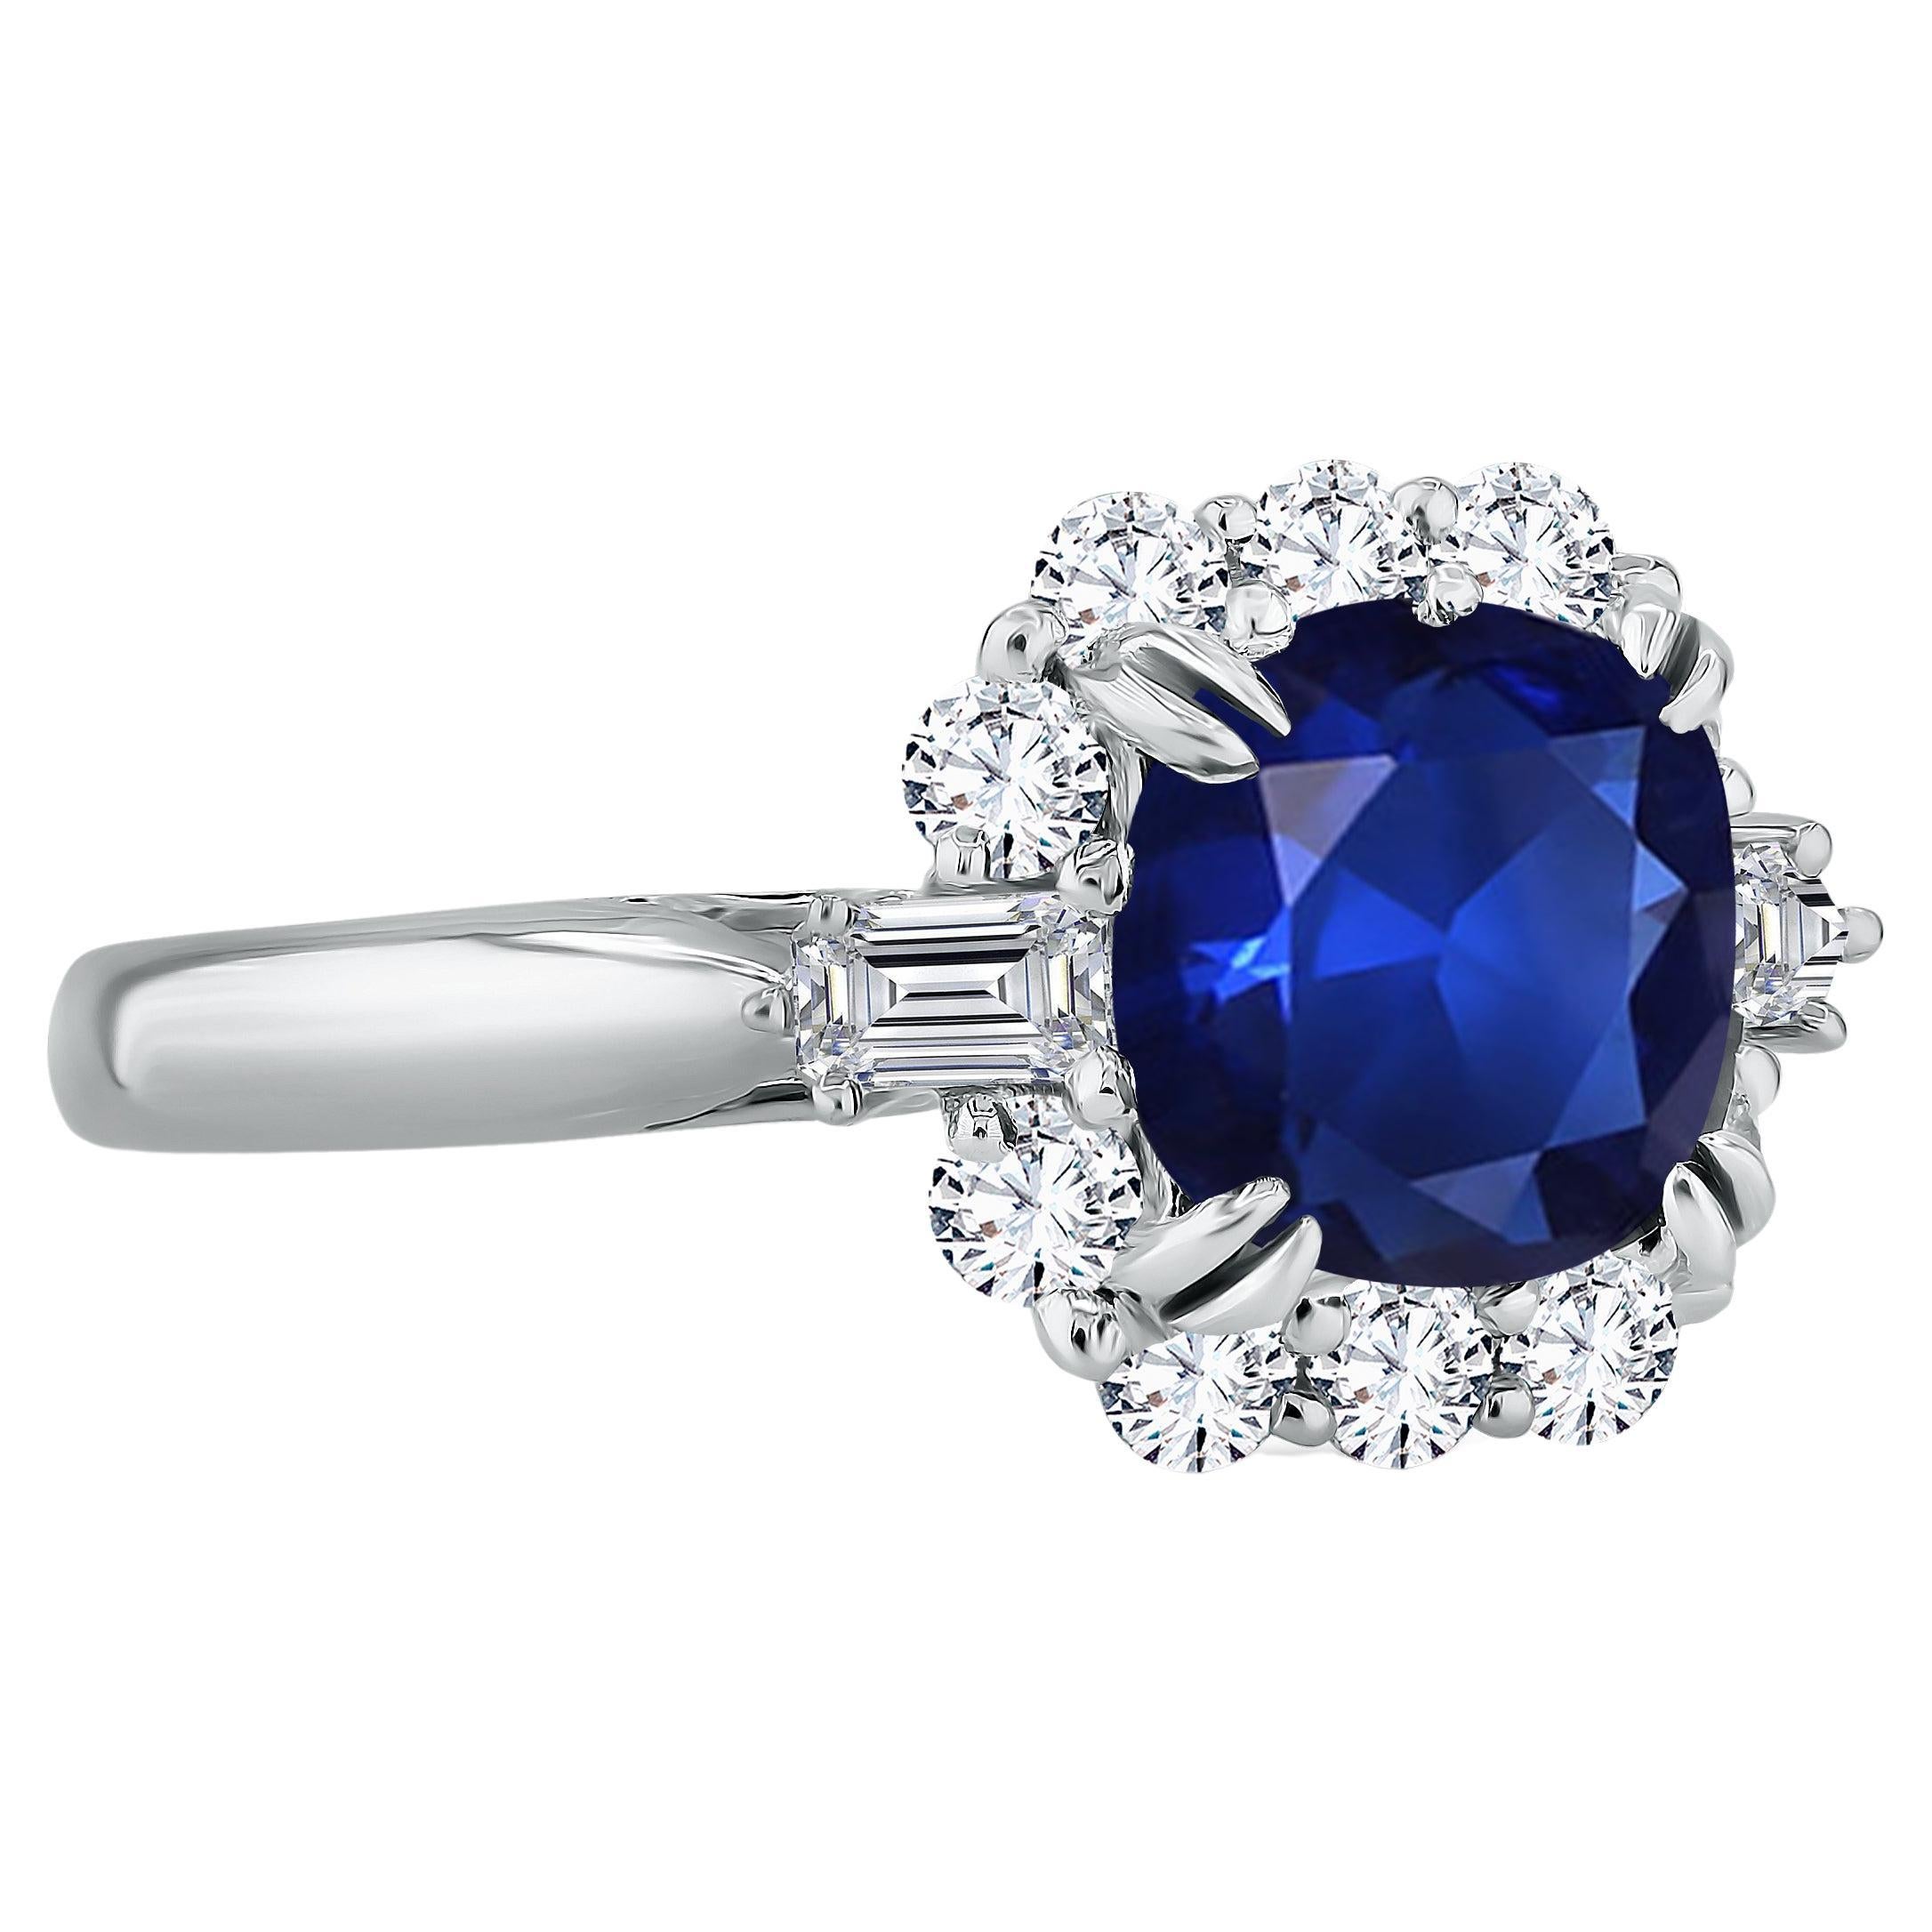 GIA Certified 2.60 Carat Cushion Cut Blue Sapphire and Diamond Halo Ring ref471 For Sale